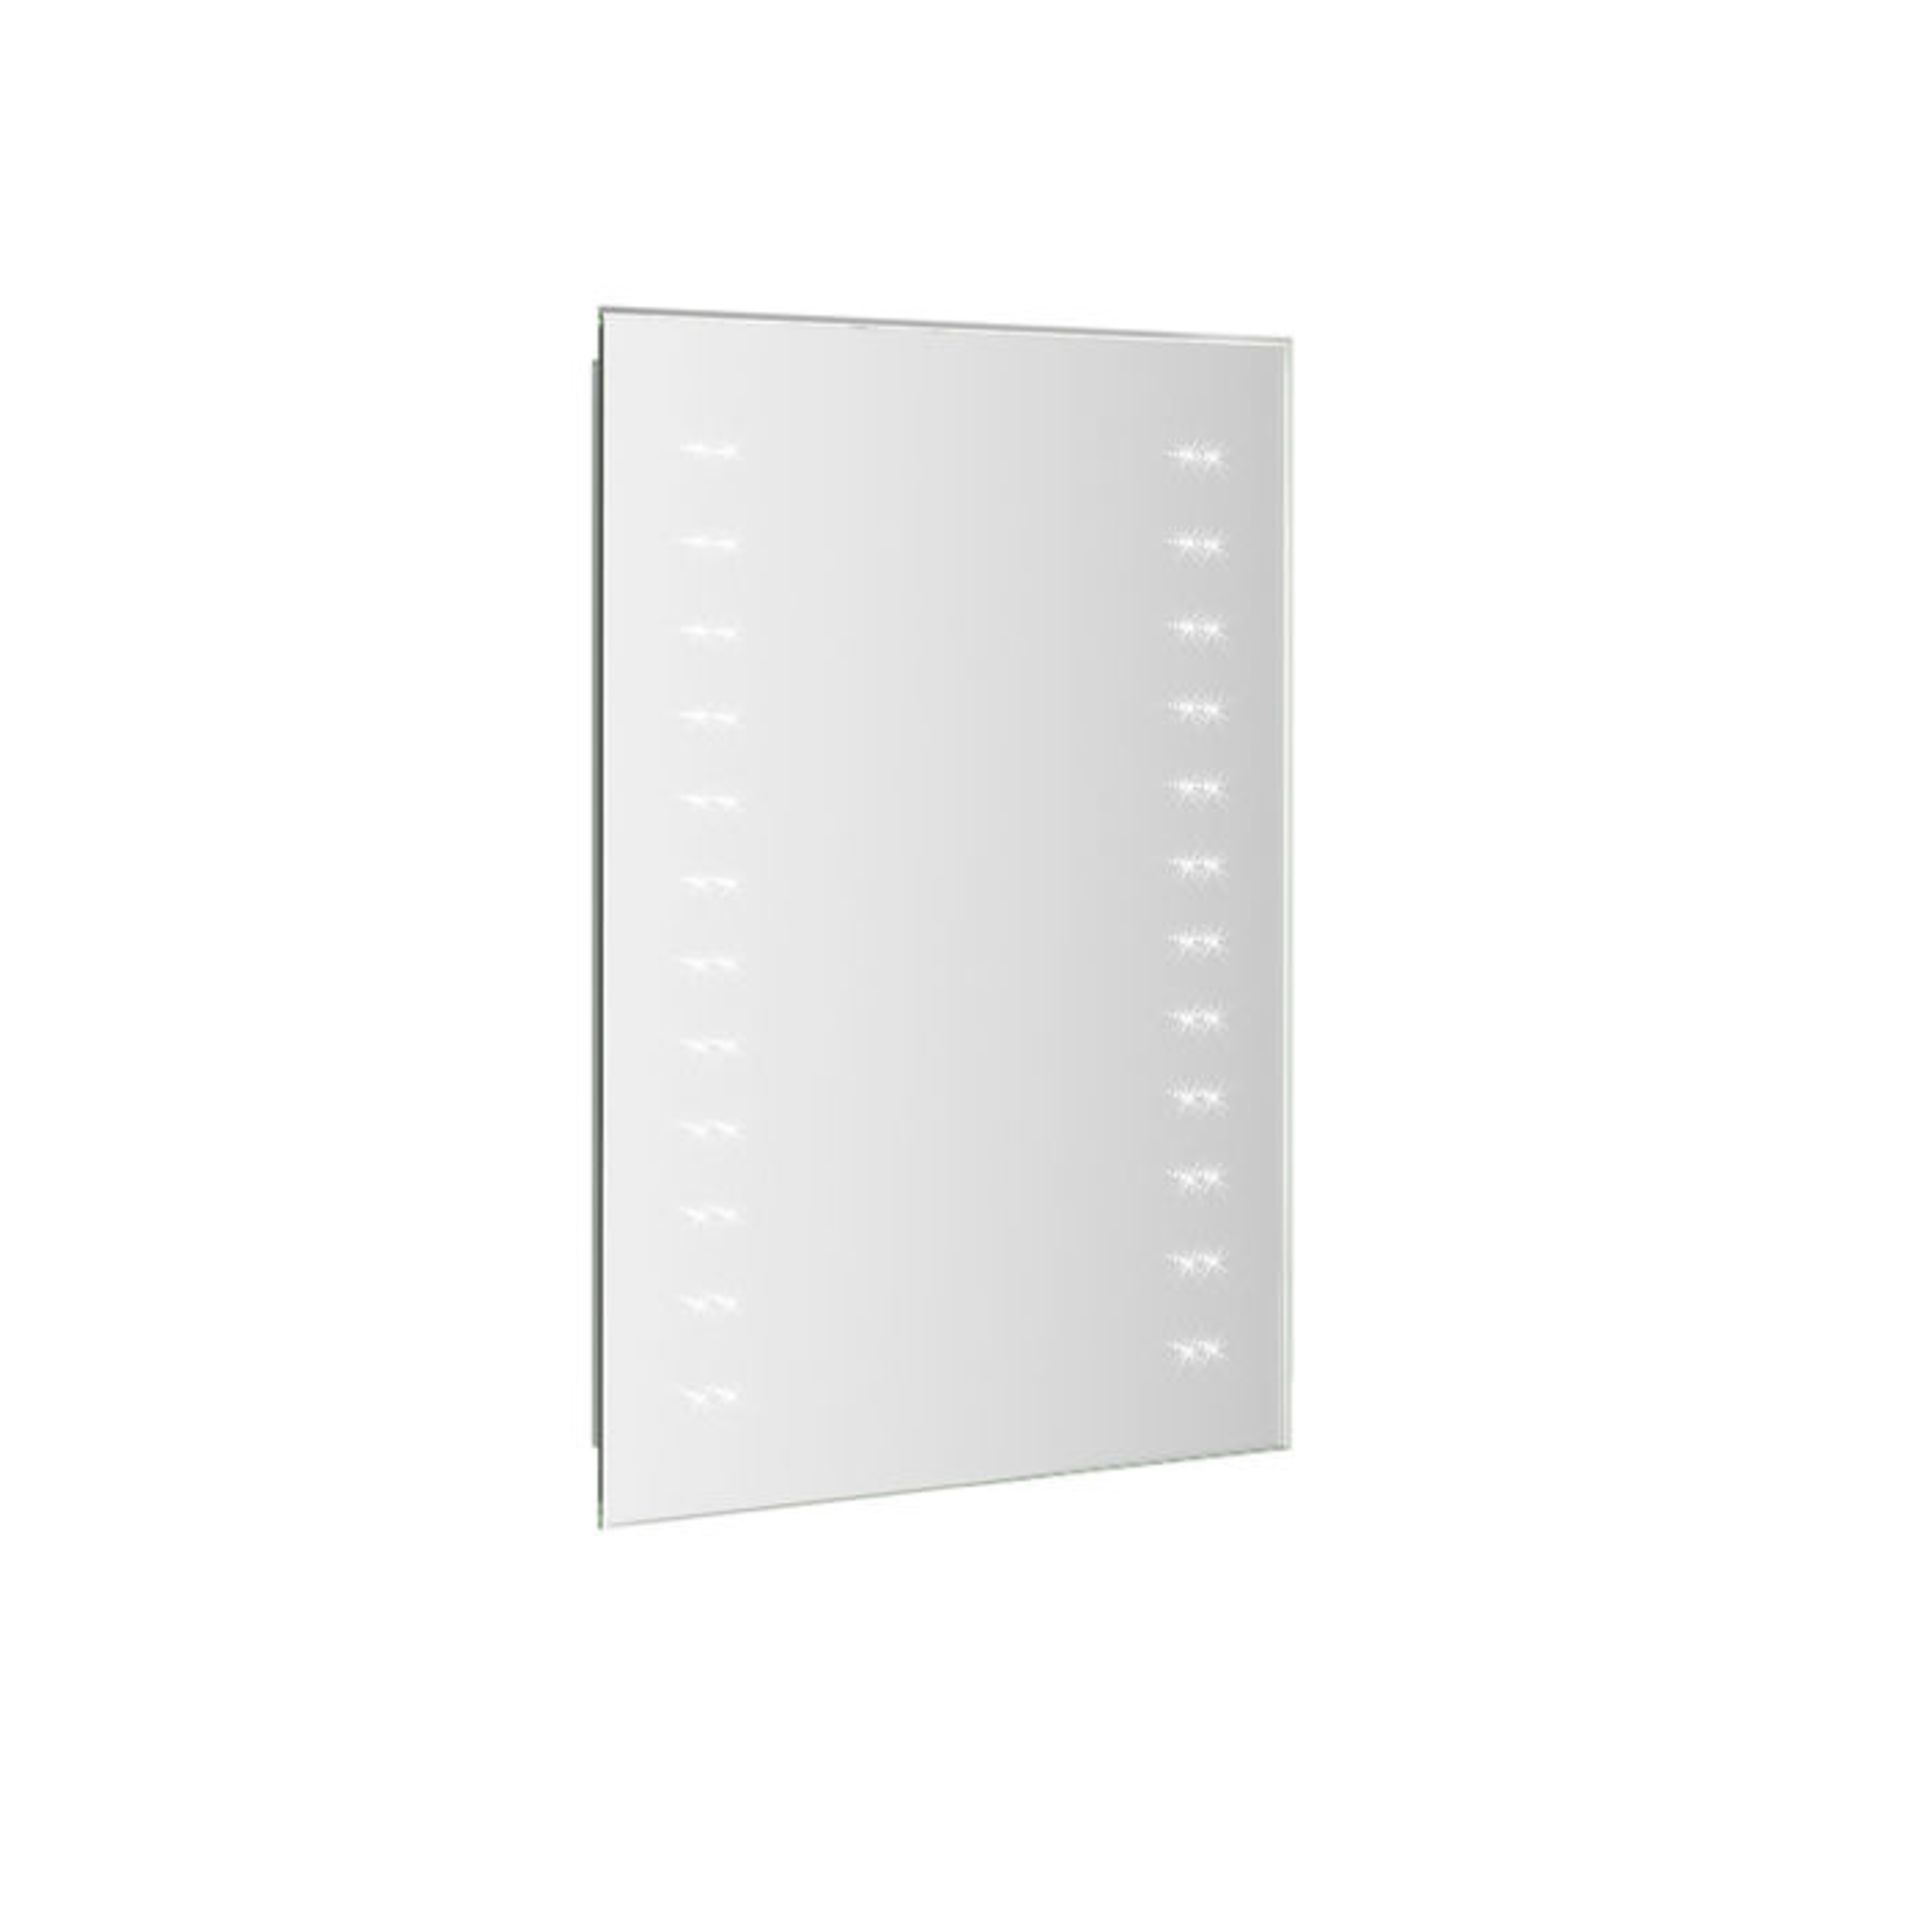 (ZL158) 390x500mm Battery Operated LED Mirror. Energy saving controlled On / Off switch Convenient